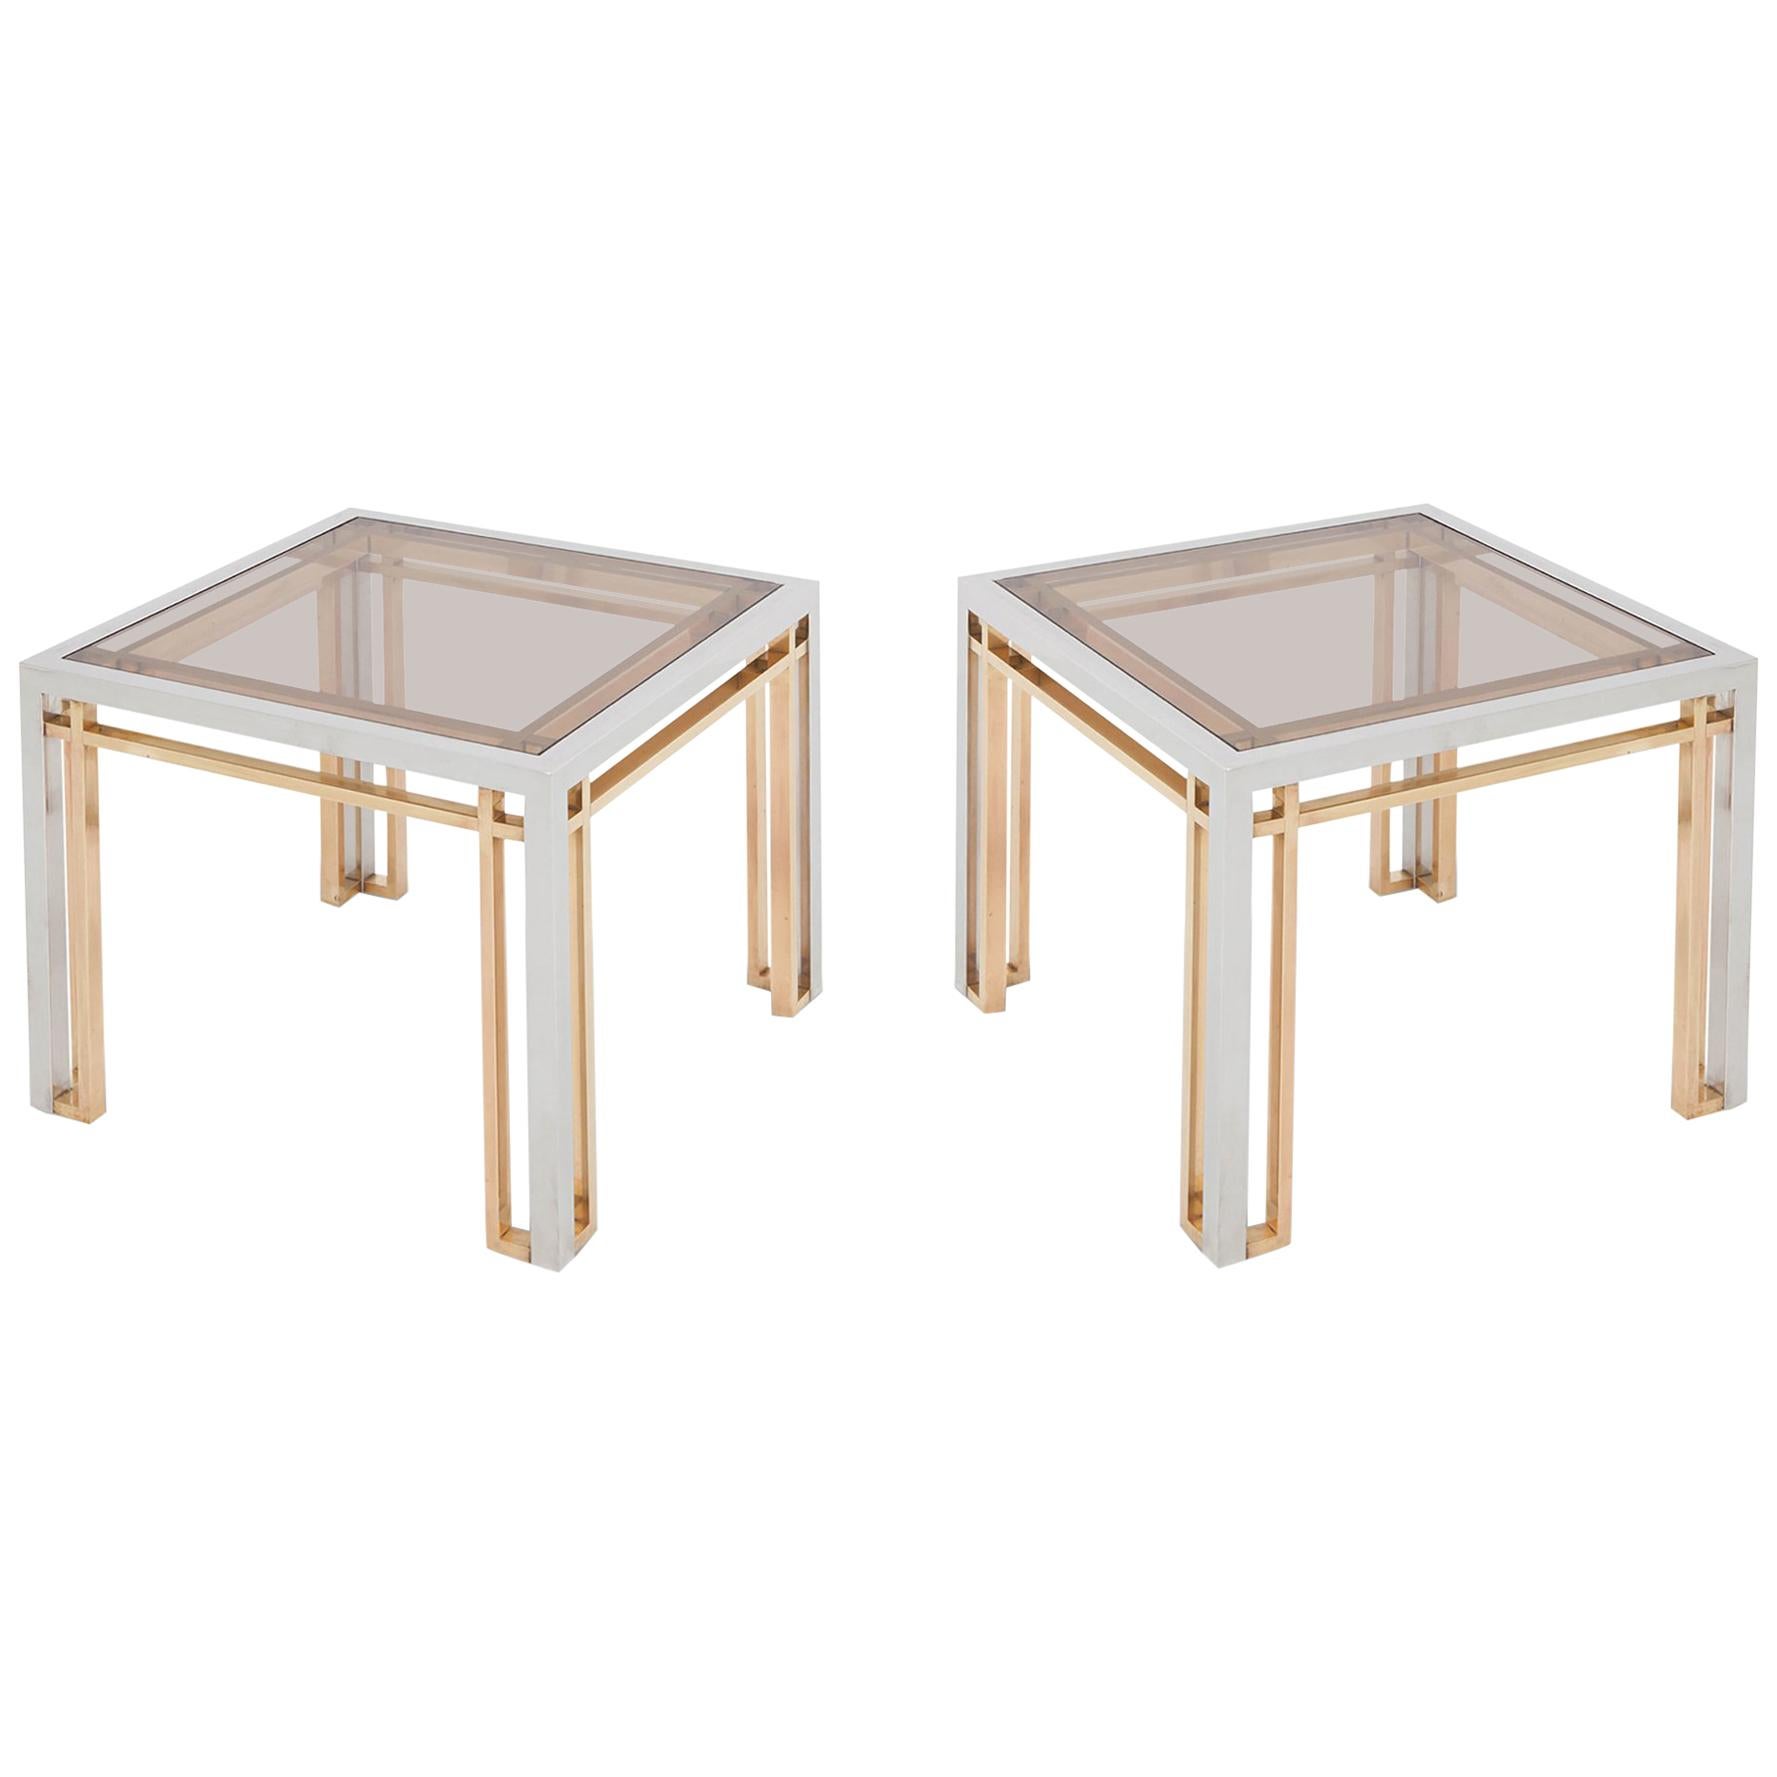 Romeo Rega Side Tables in Chrome, Brass and Glass, Set of 2